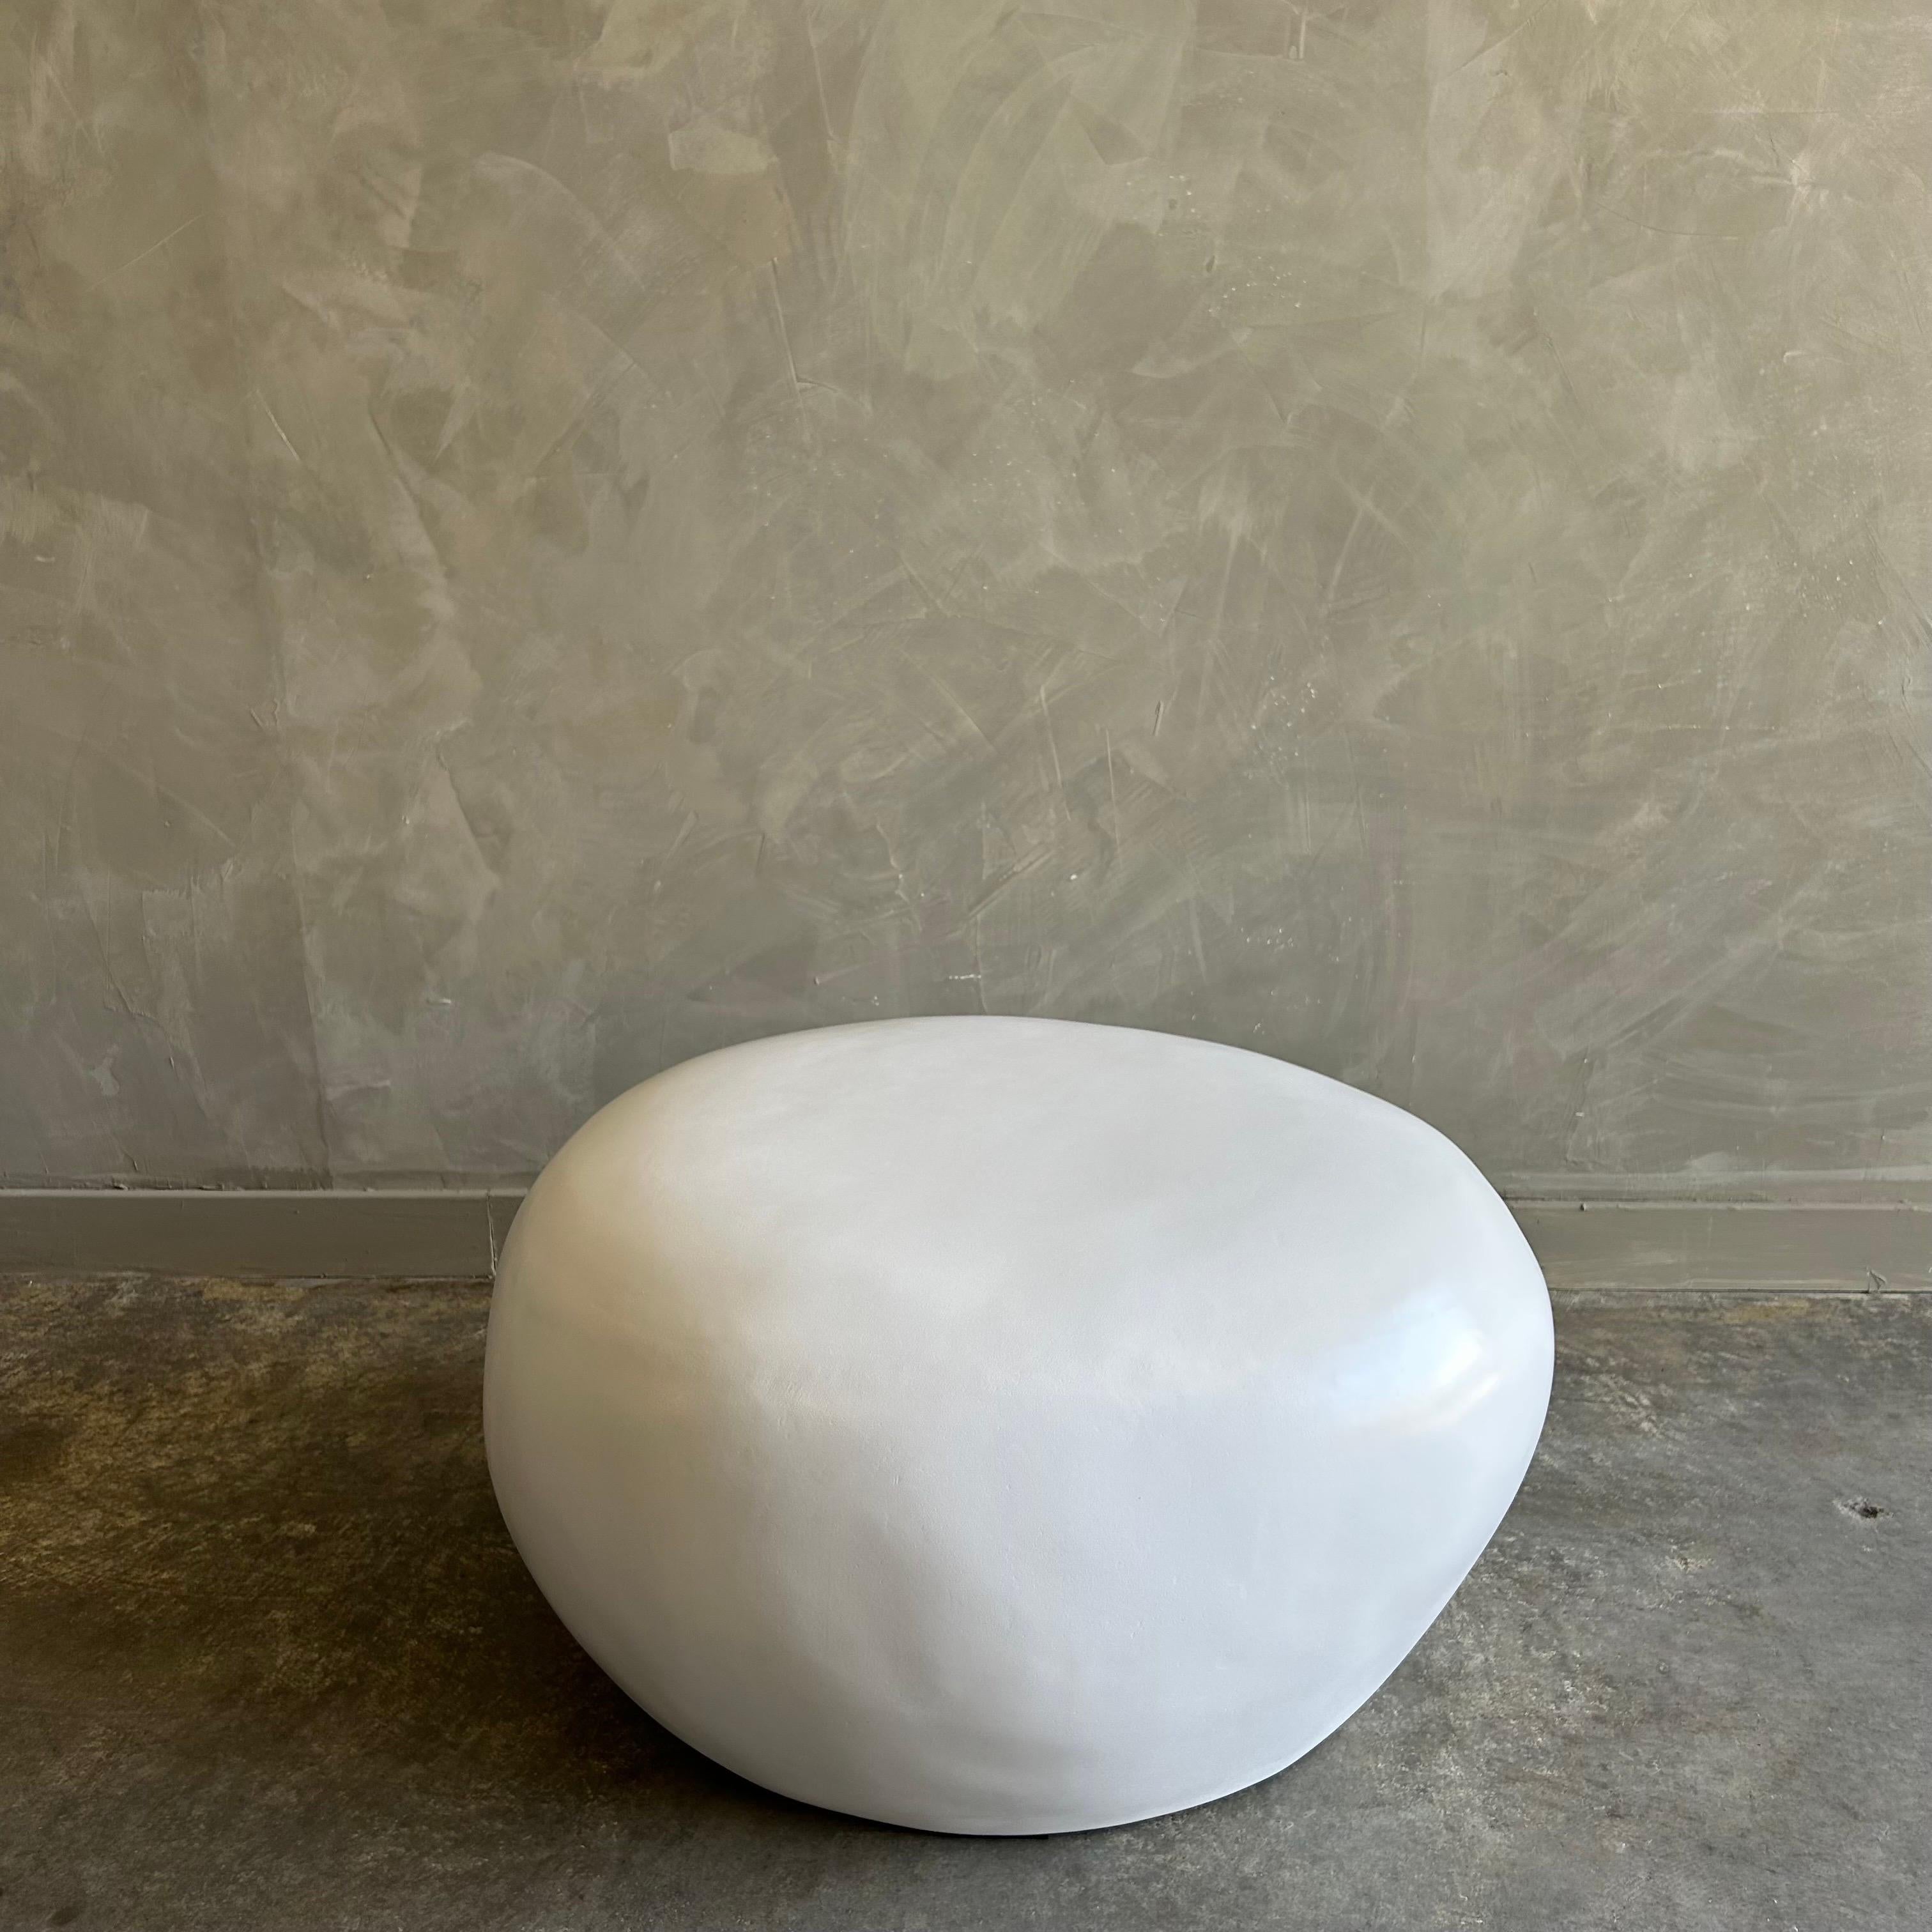 Outdoor pebble stone garden seat
Size: 29”w x 26”d x 16”h
Organic stone seat, available for immediate delivery.
Shown in white, also available in natural gray.
Cast Stone Pebble Seat is an organically-shaped concrete seating sculpture it’s furniture